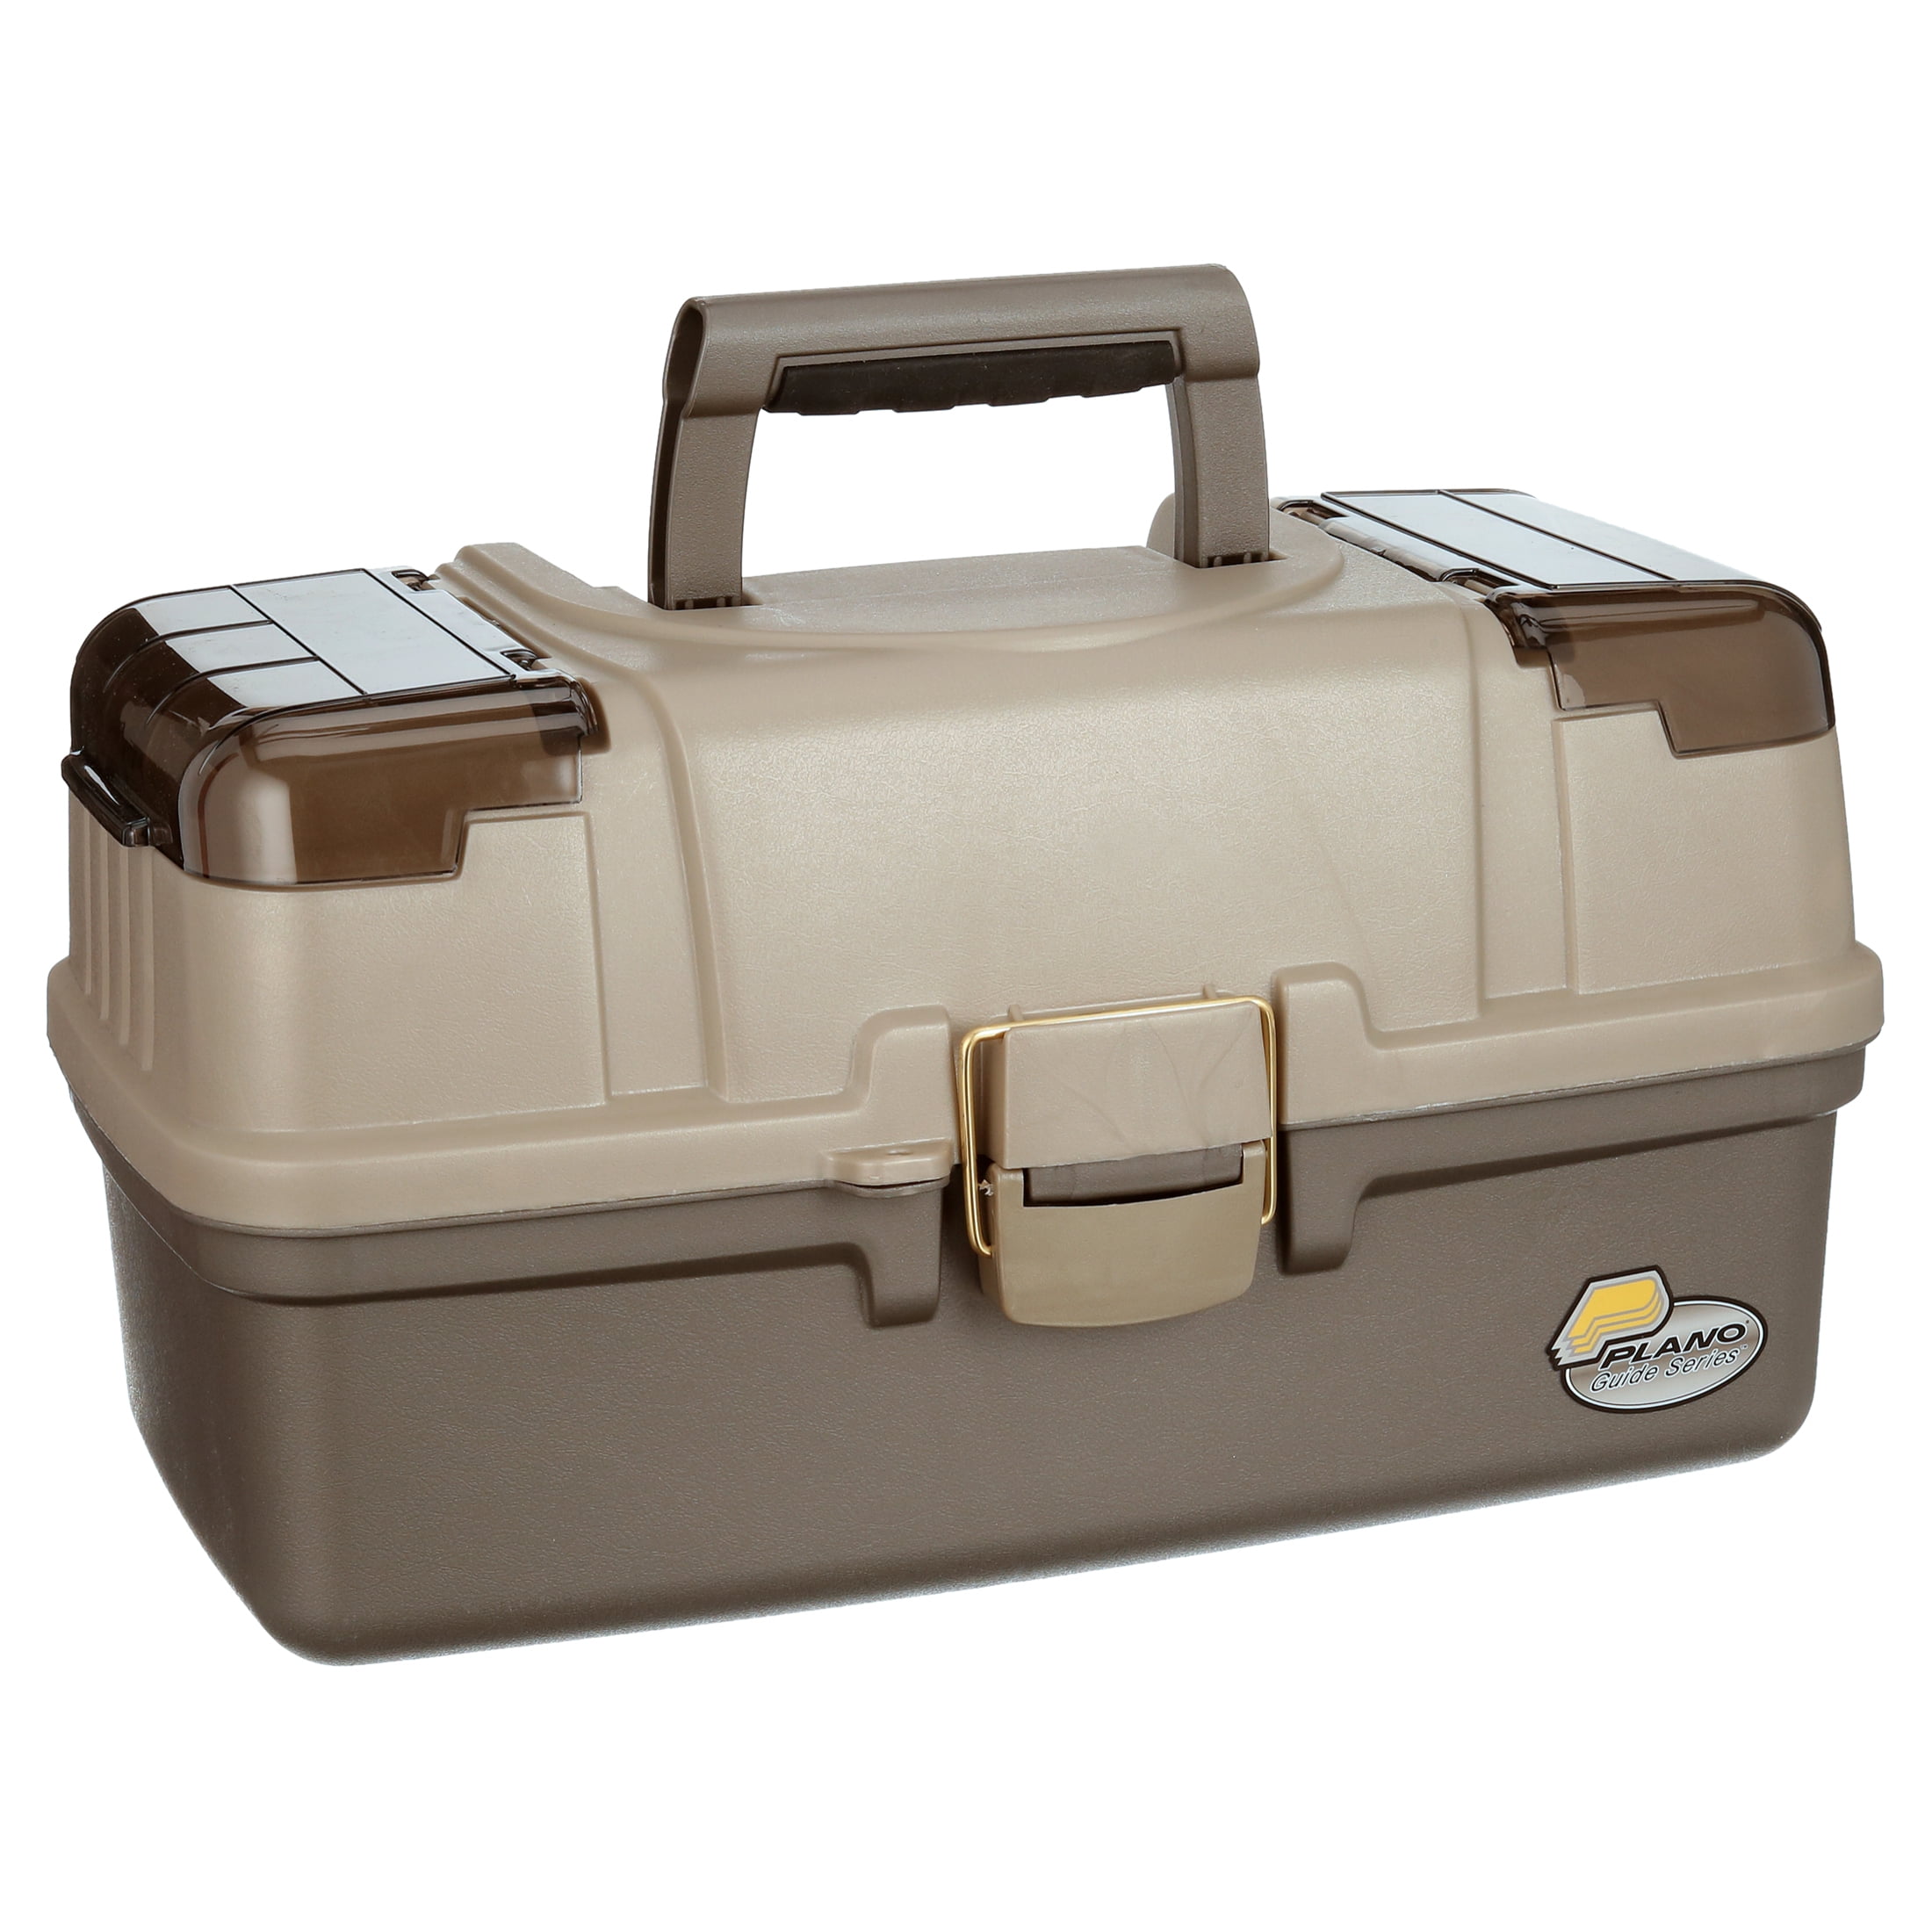 Plano Fishing Large 3-Tray Tackle Box with Top Access, Graphite/ Sandstone  